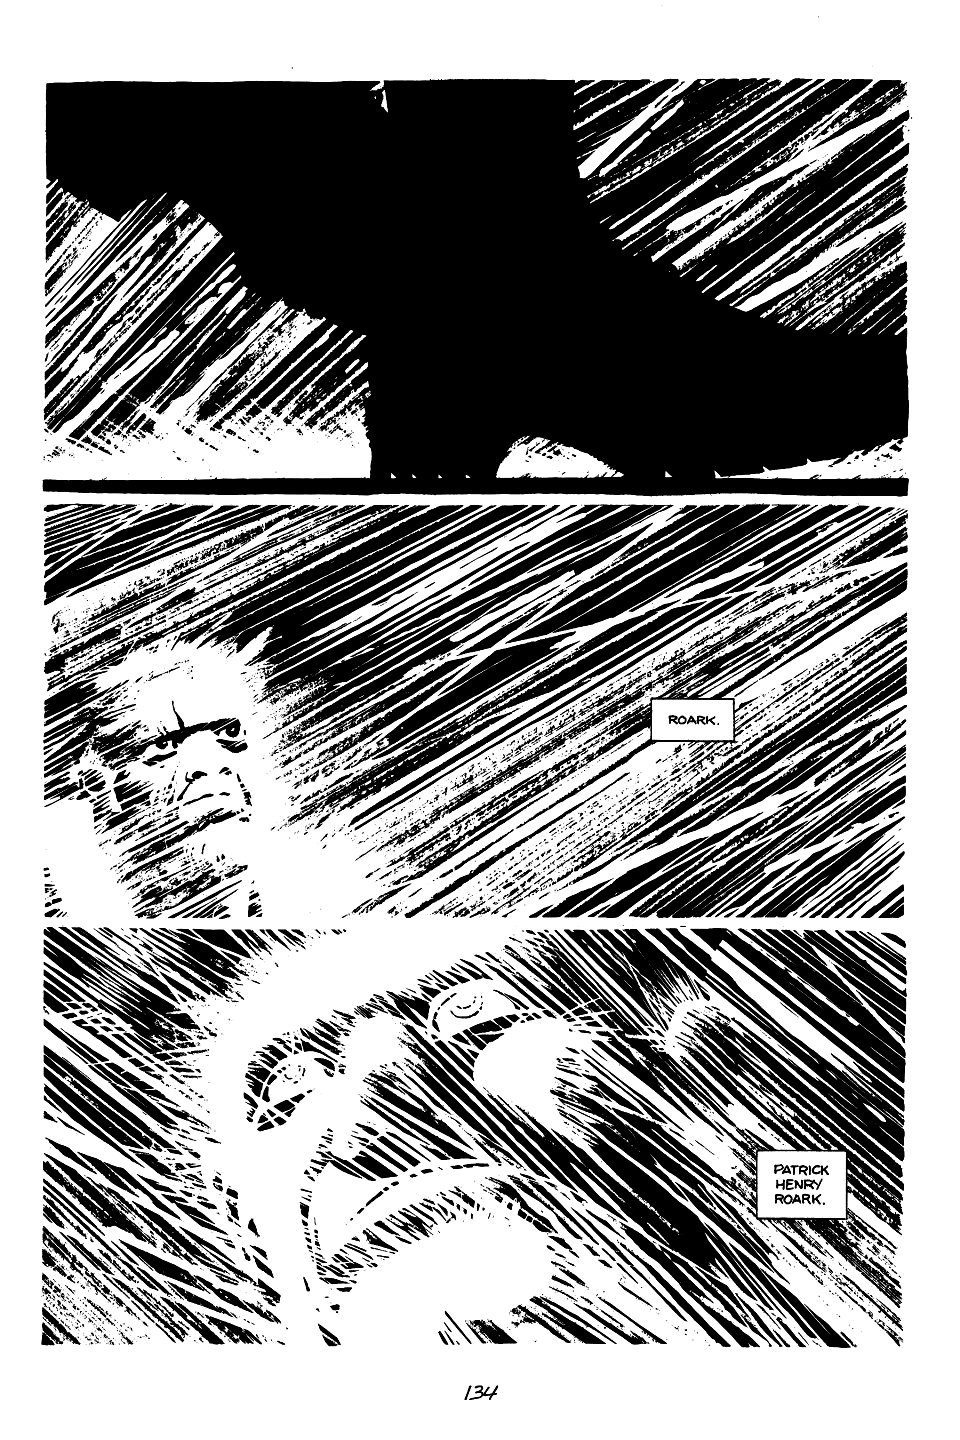 page 134 of sin city 1 the hard goodbye